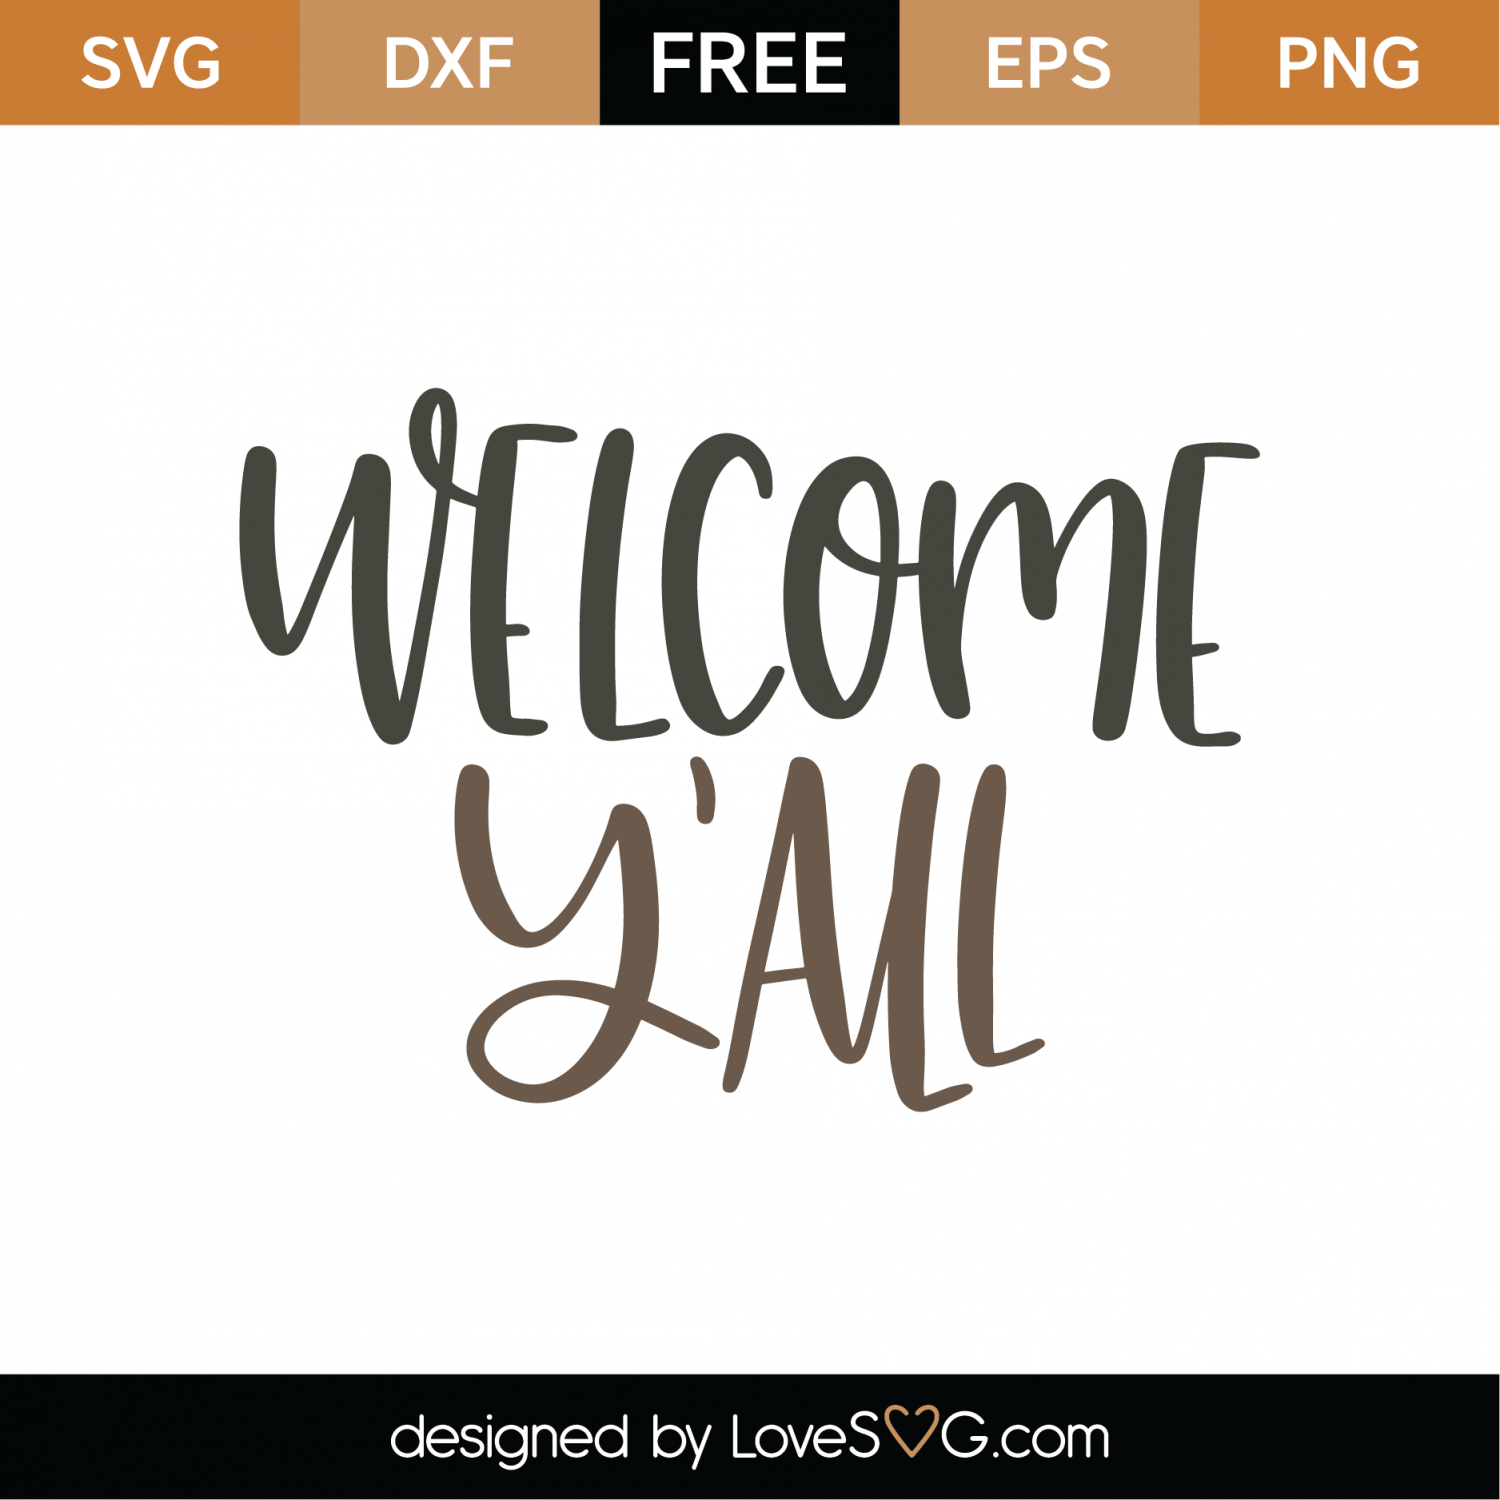 Download Free Welcome Y'all SVG Cut File | Lovesvg.com